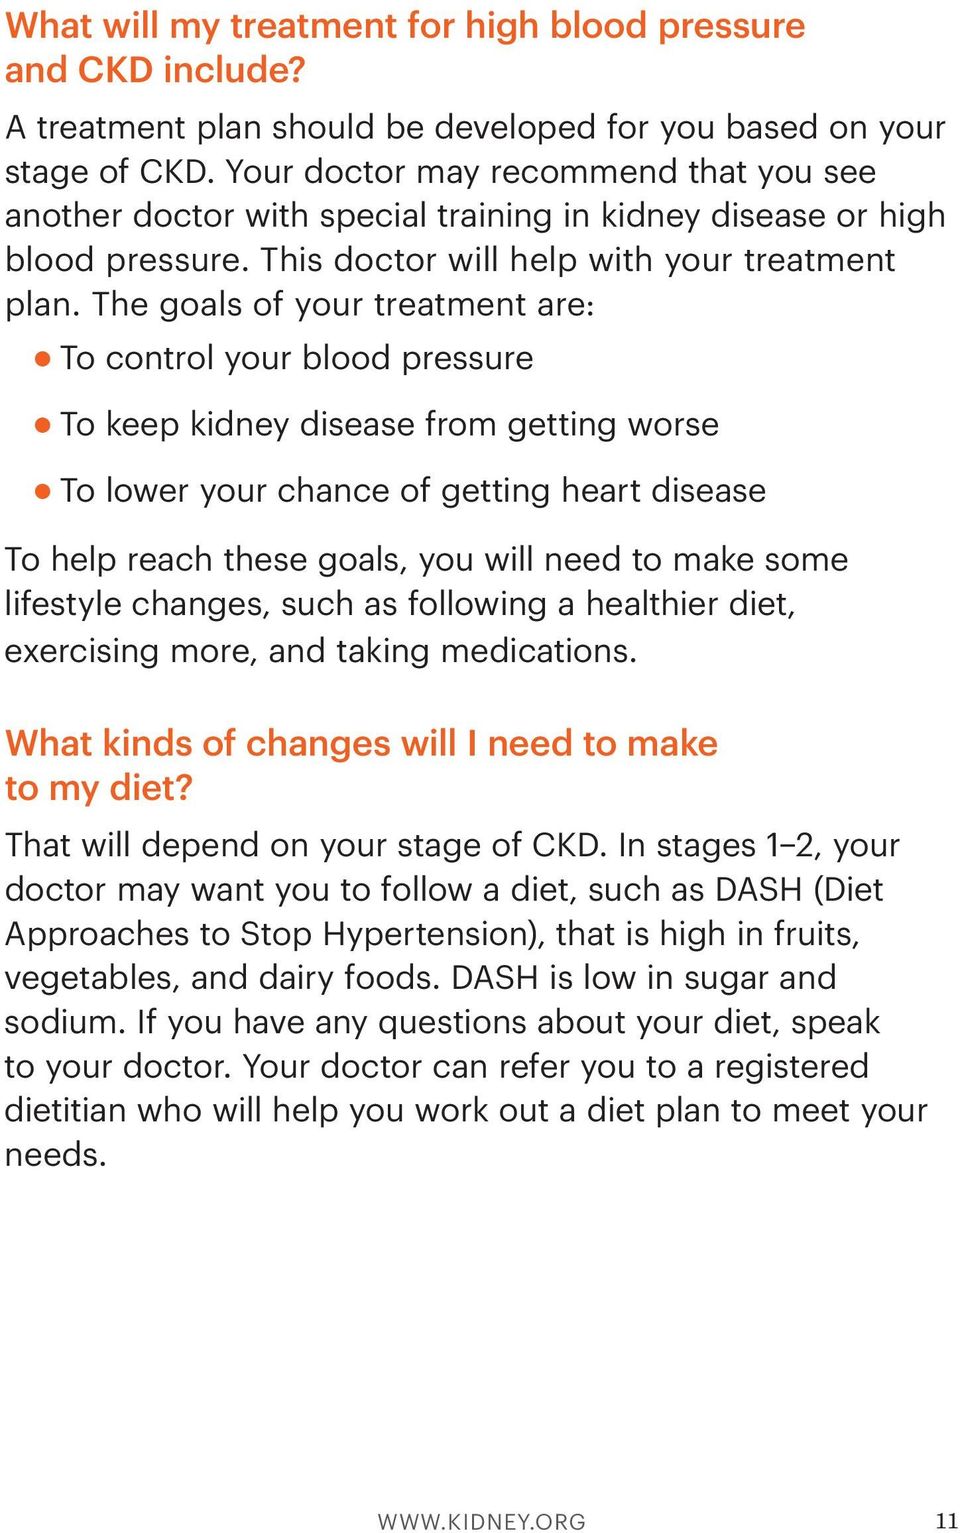 The goals of your treatment are: To control your blood pressure To keep kidney disease from getting worse To lower your chance of getting heart disease To help reach these goals, you will need to